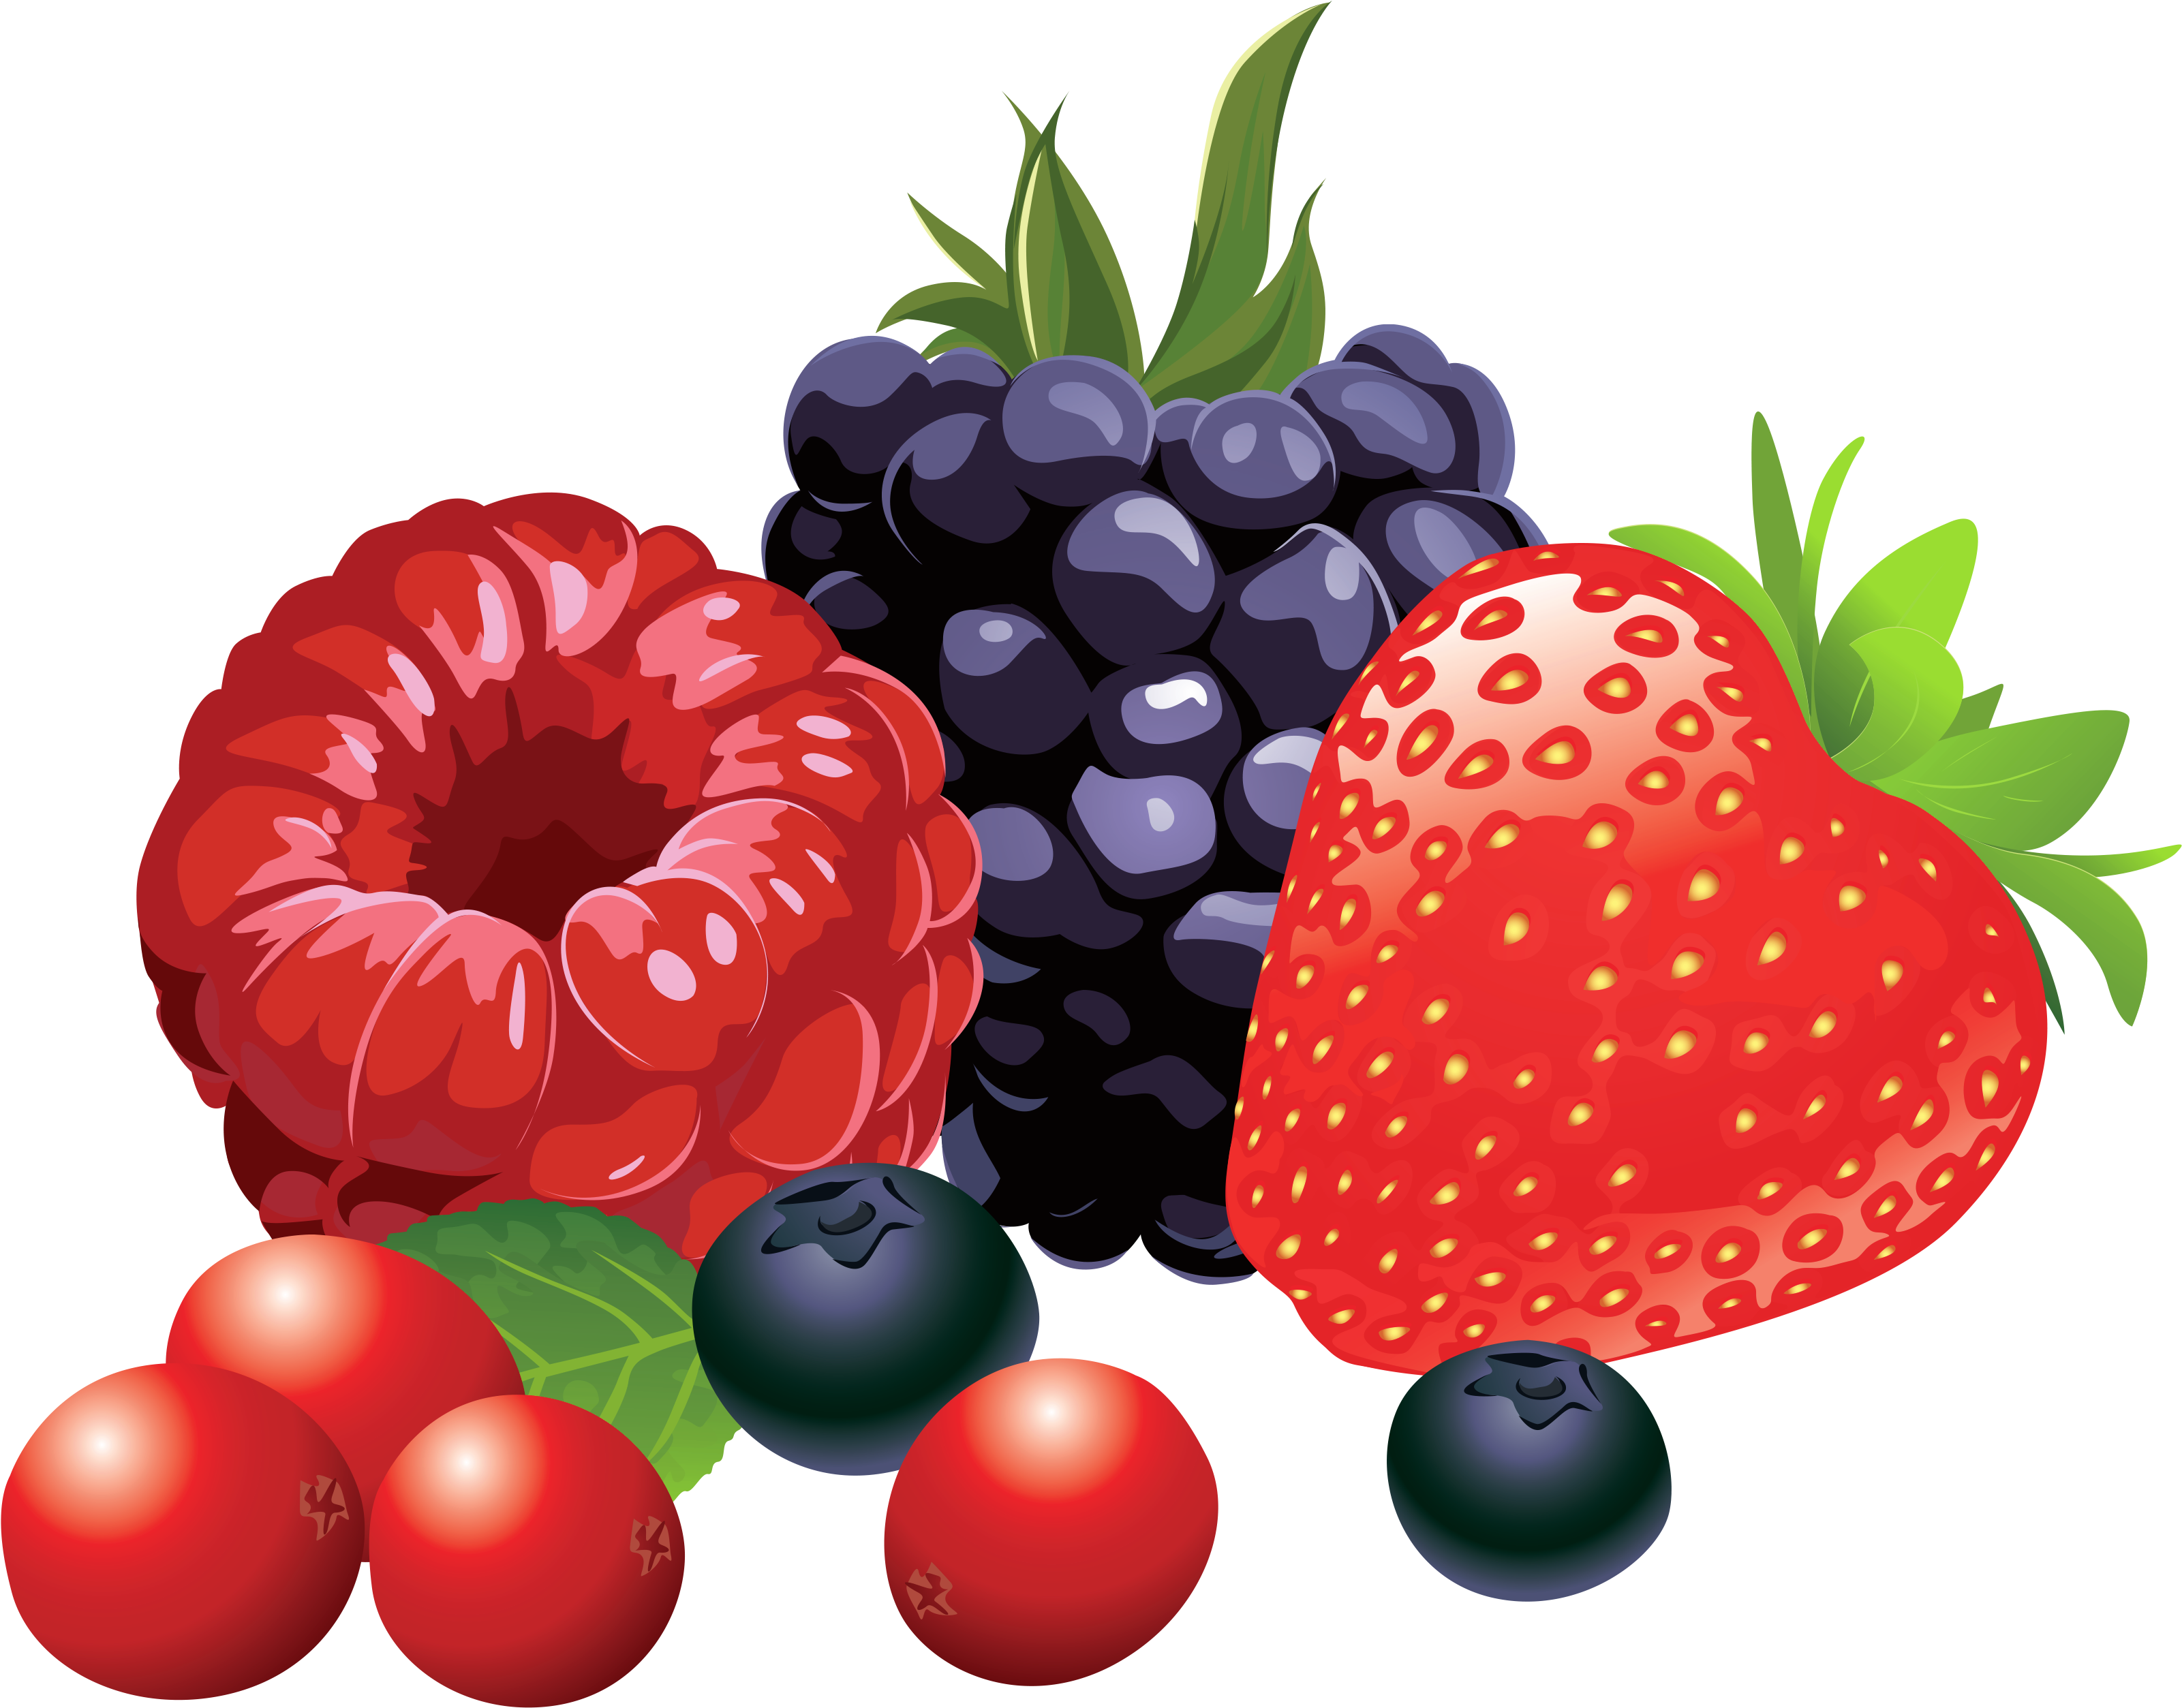 Assorted Berries Illustration PNG